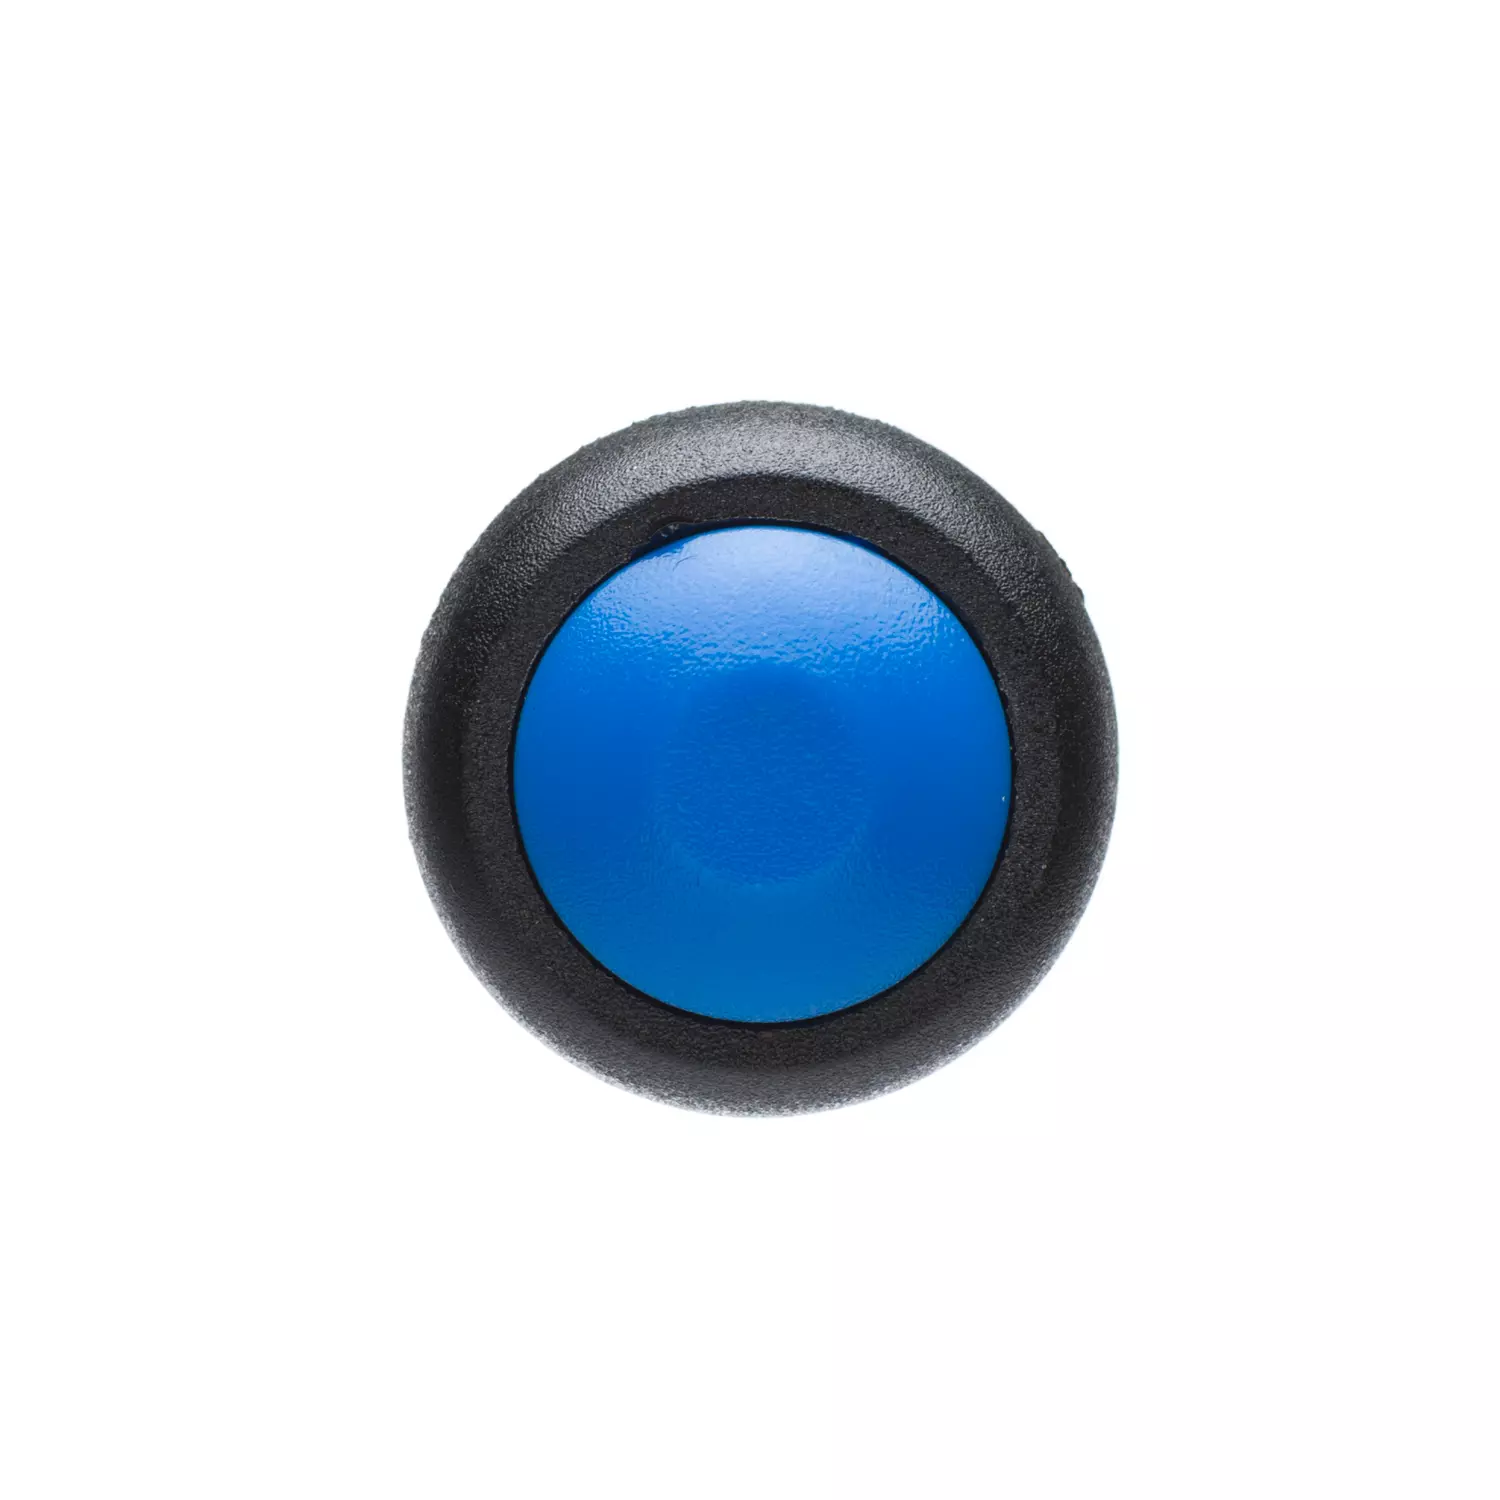 Photo of 12mm Momentary Push Button Dome - Blue